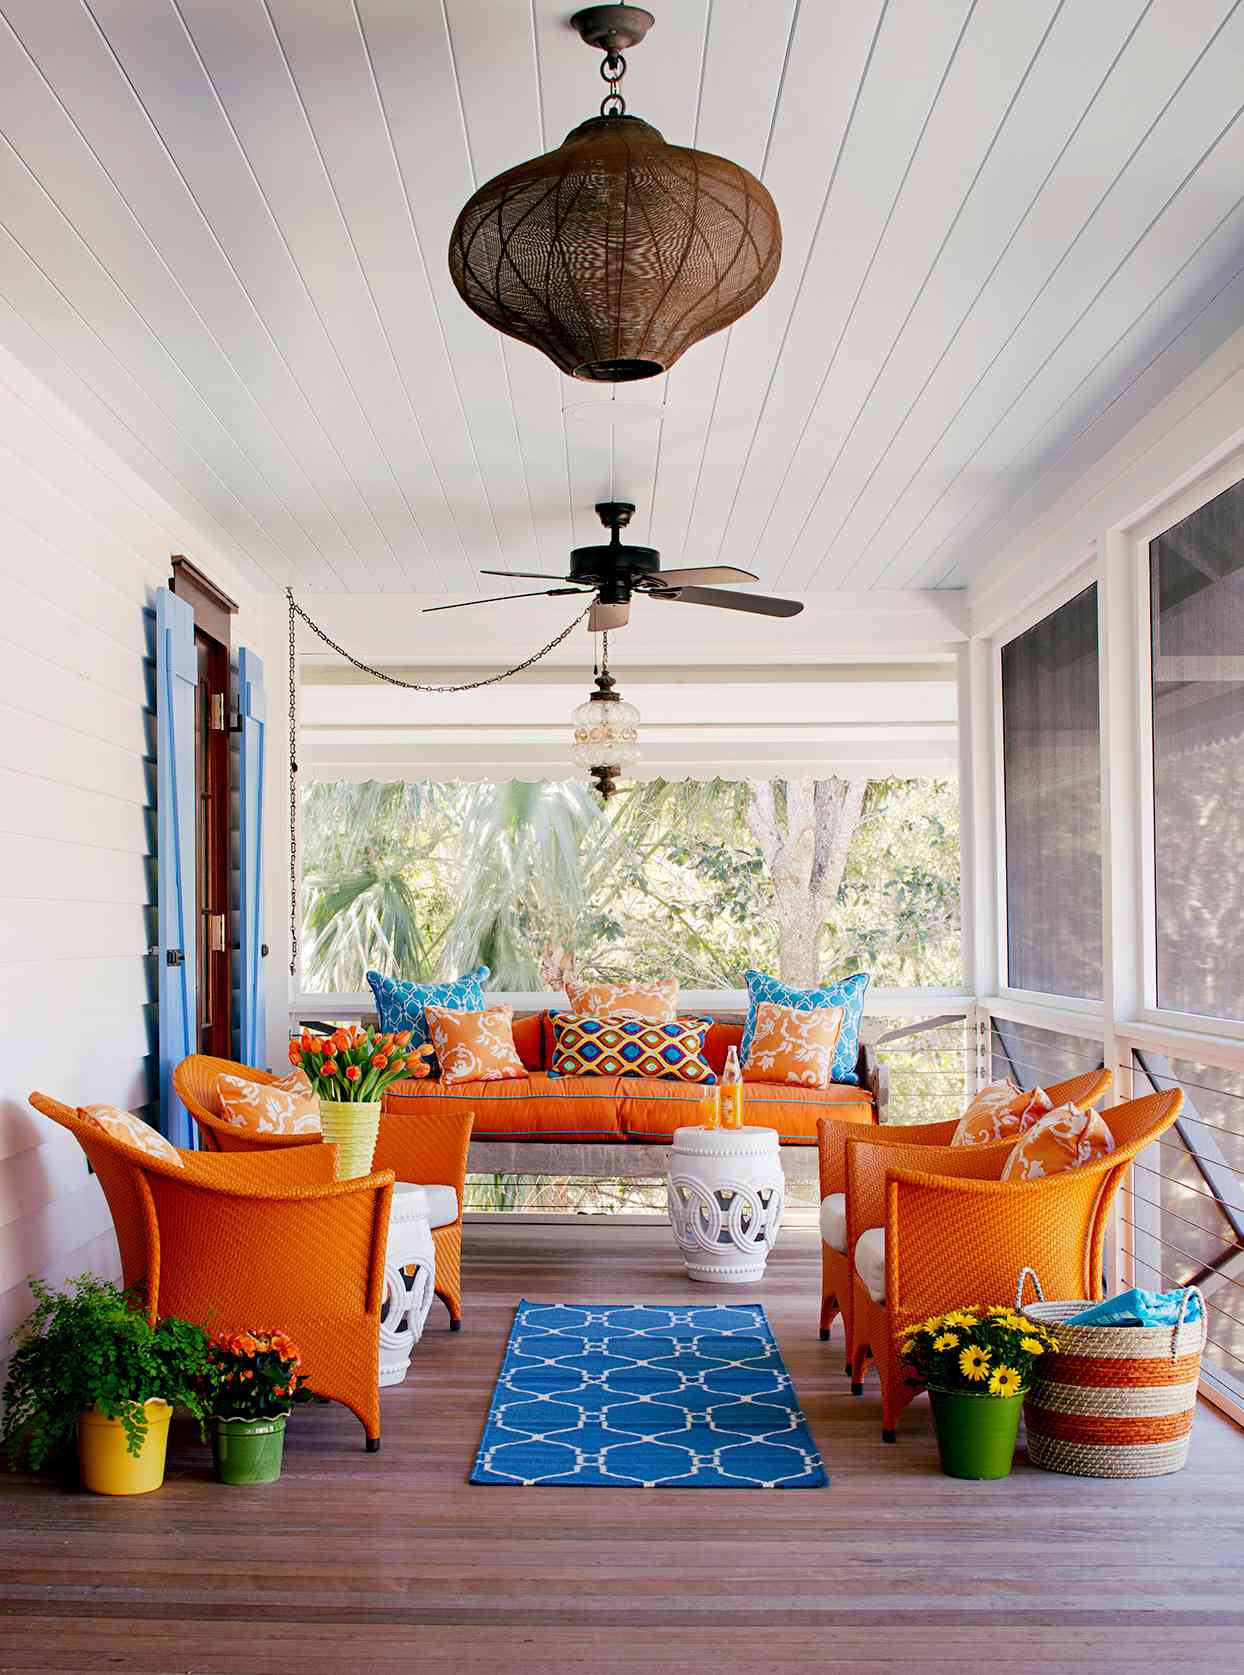 Porch with blue tan theme, chairs, pillows